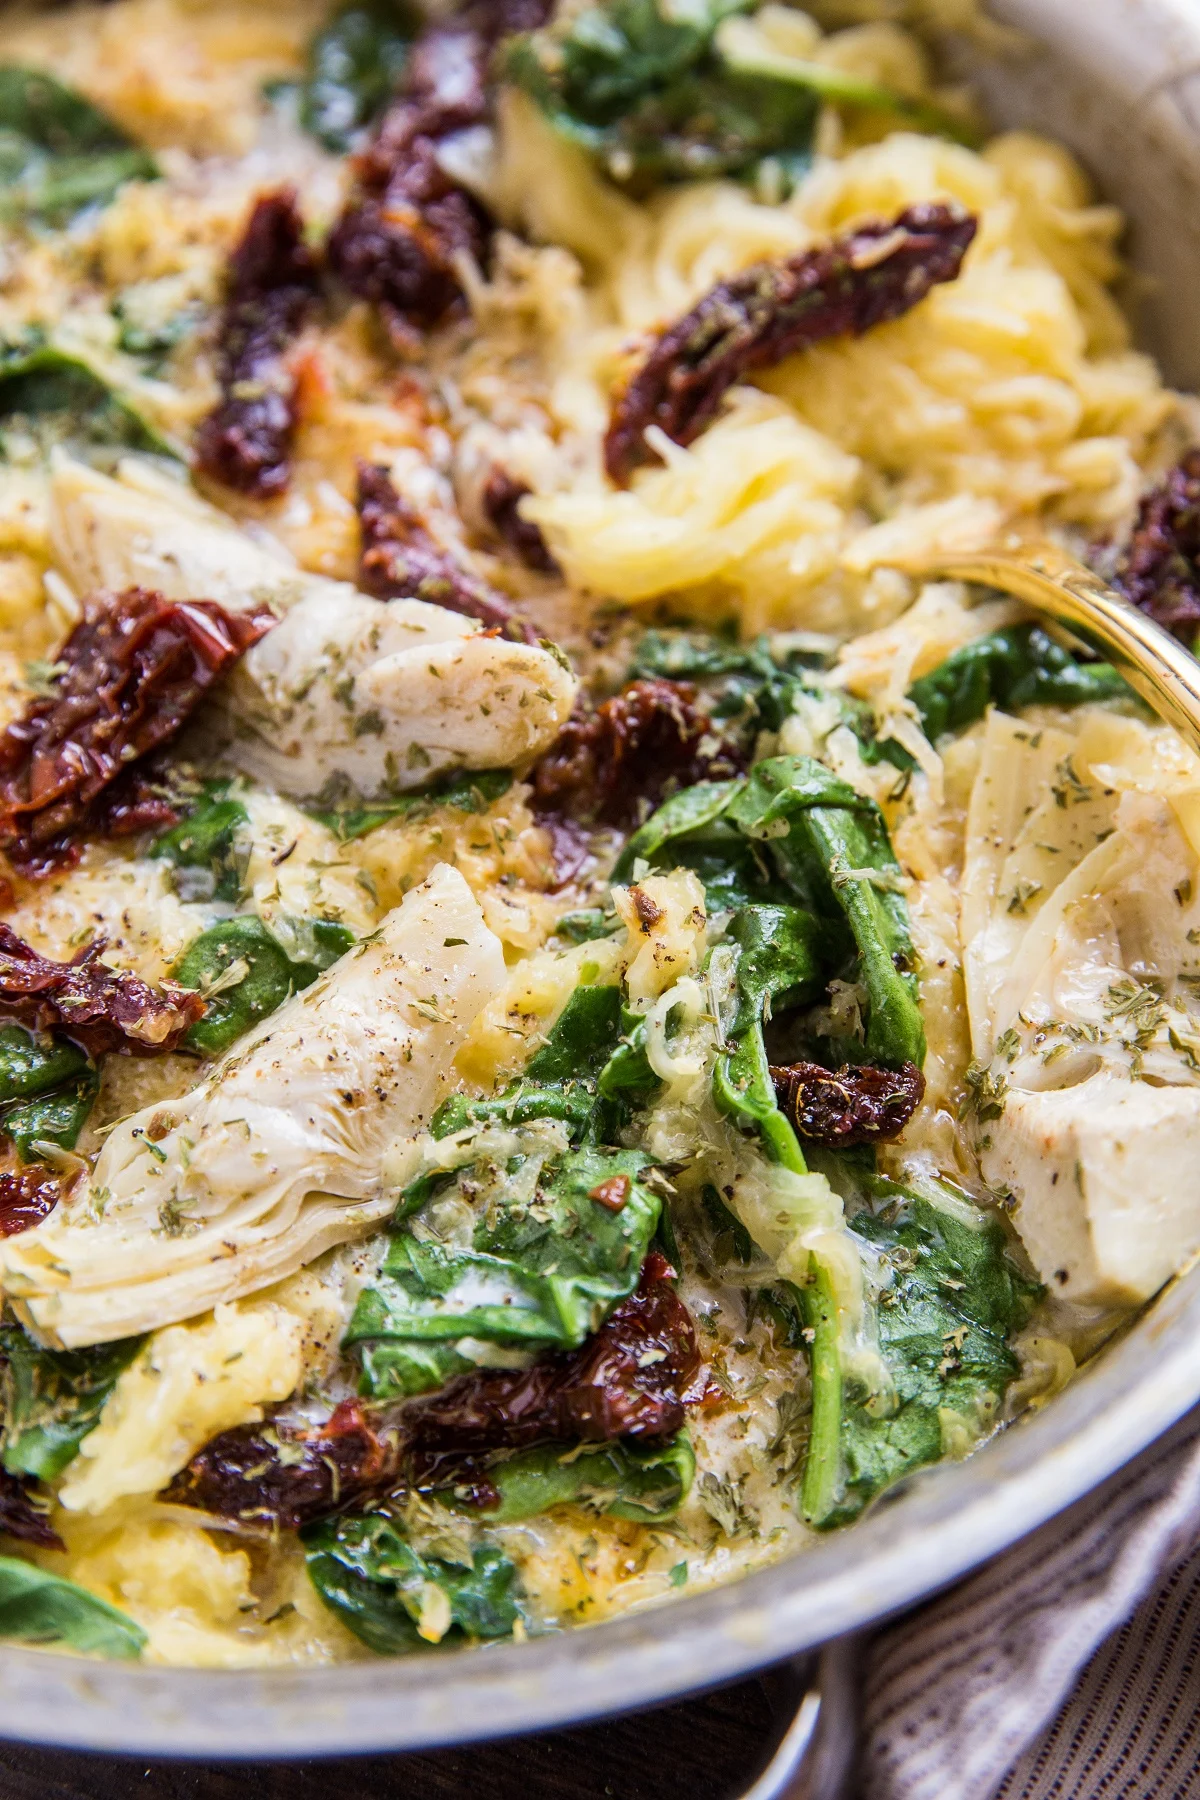 Vegan Tuscan Spaghetti Squash with sun-dried tomatoes, artichoke hearts and spinach - a creamy dairy-free spaghetti squash recipe that is paleo, low-carb and keto